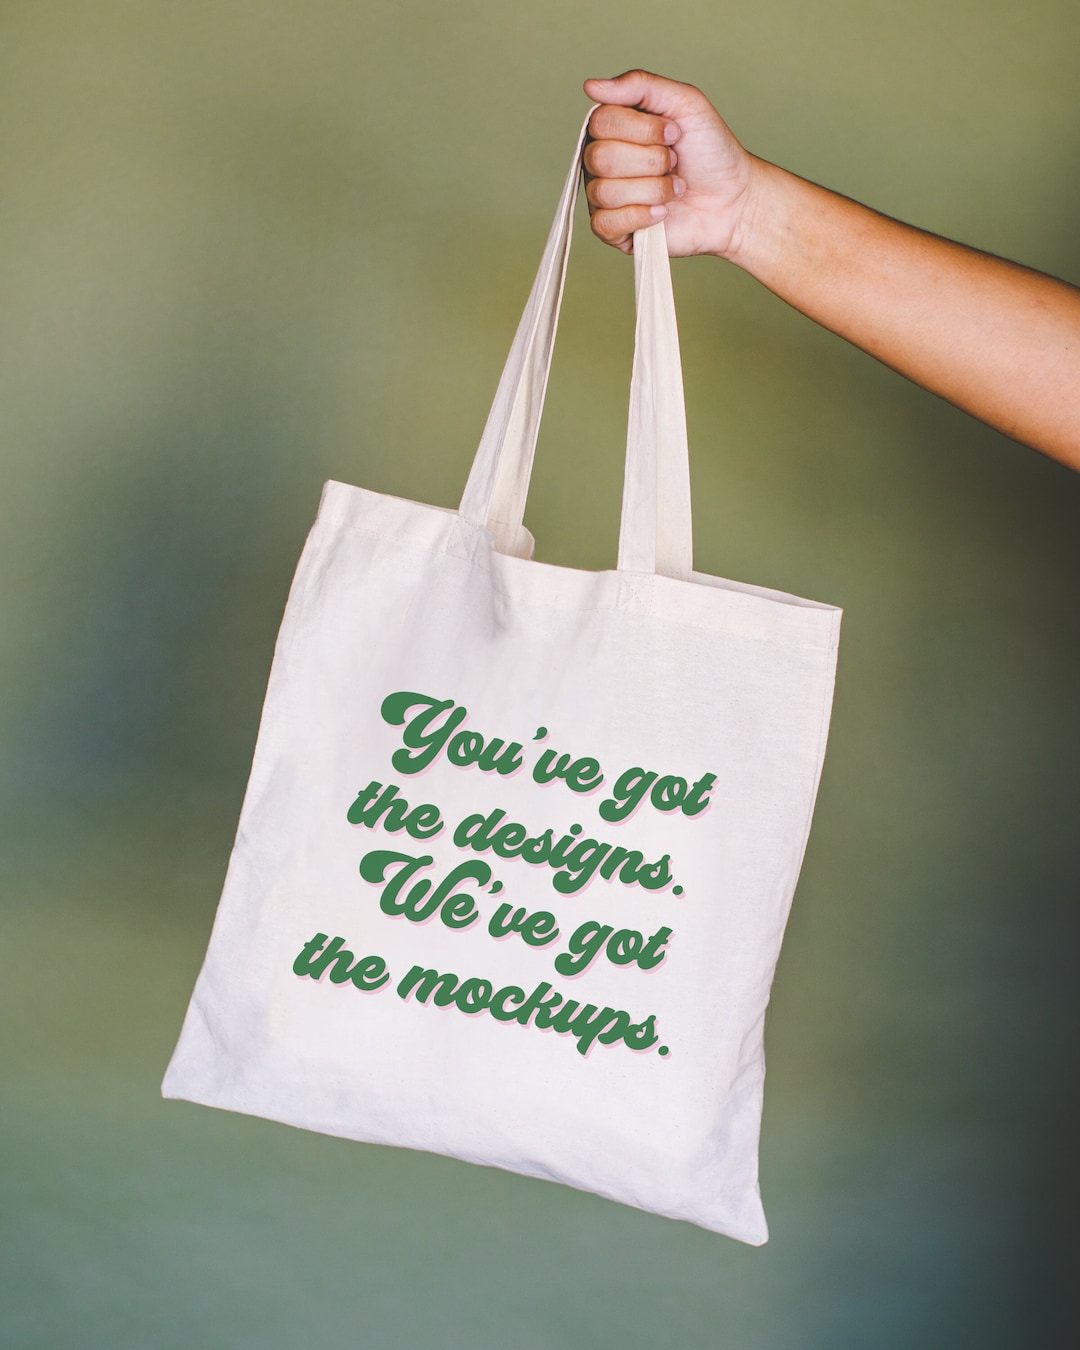 Tote Bag Mockup With Green Backdrop: Simple and Clean Studio Photo of ...